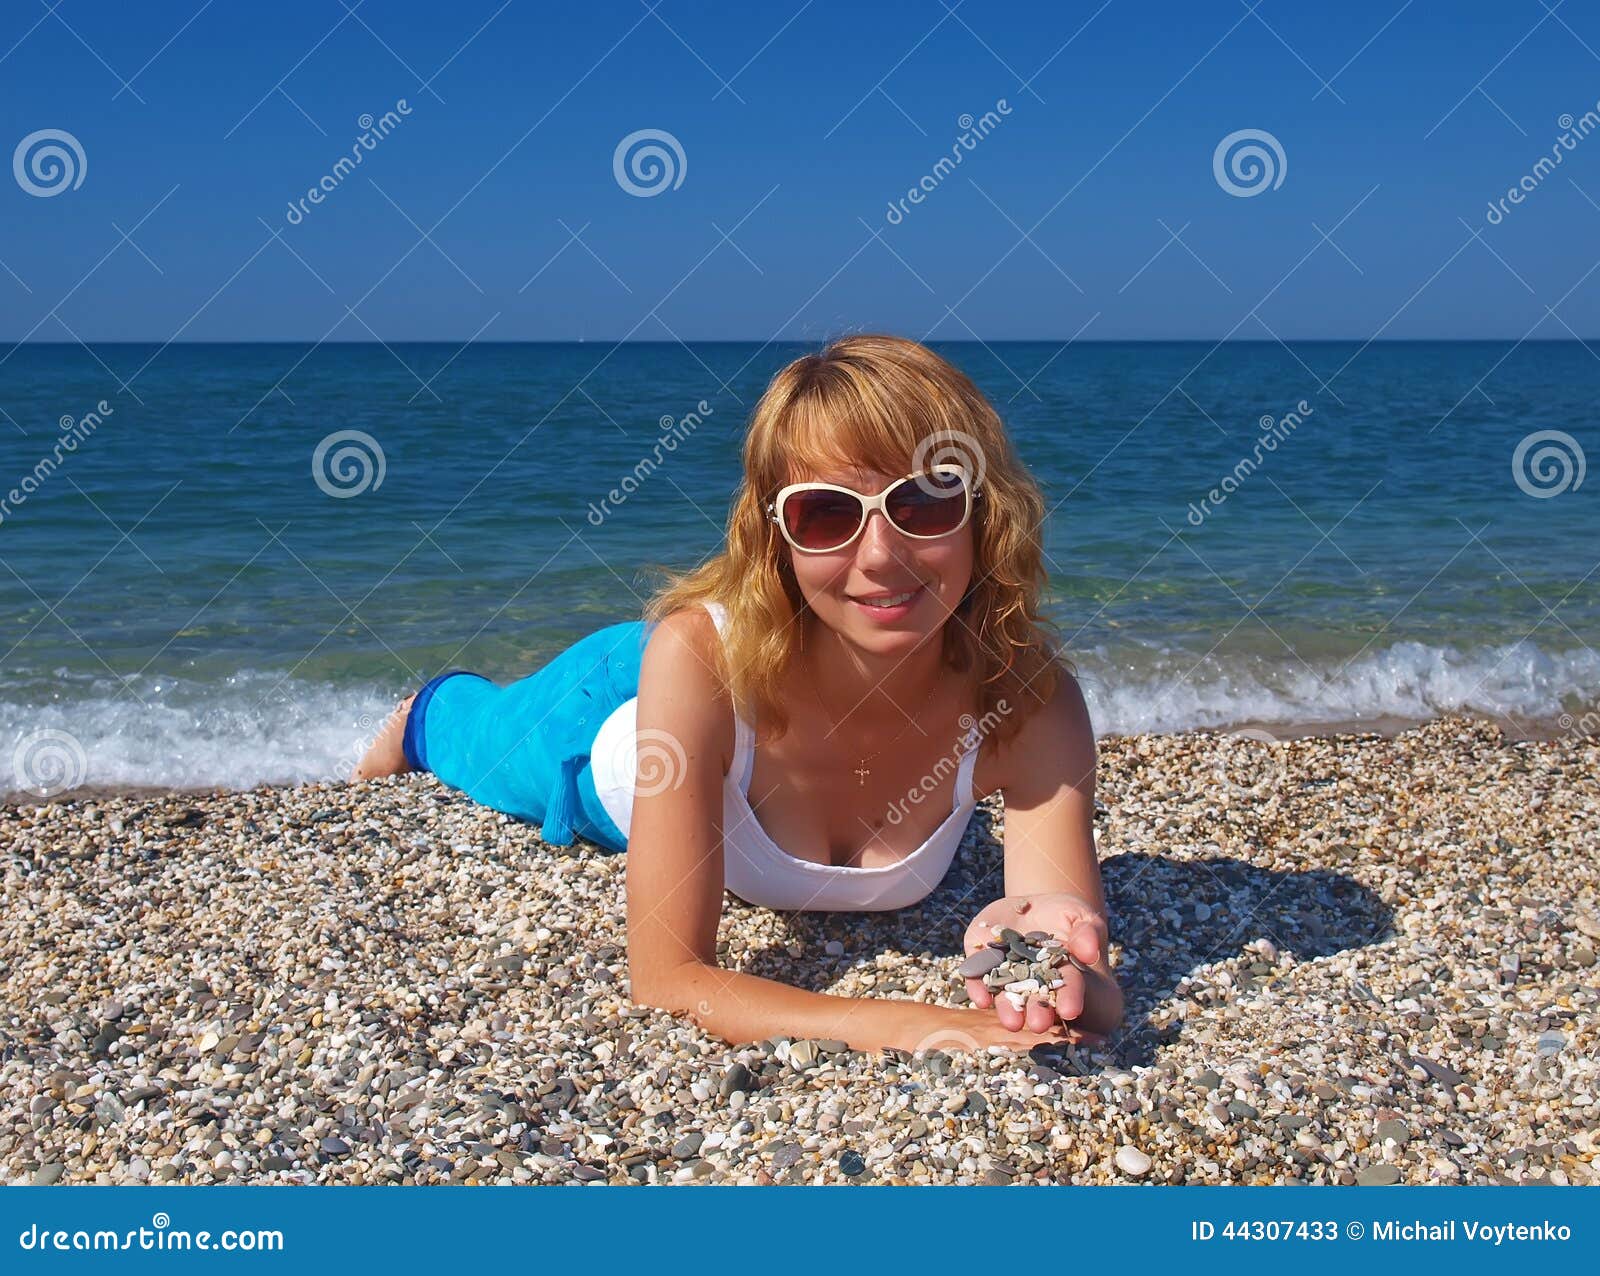 Beautiful Girl In Sunglasses On The Beach Stock Image Image Of Happy 